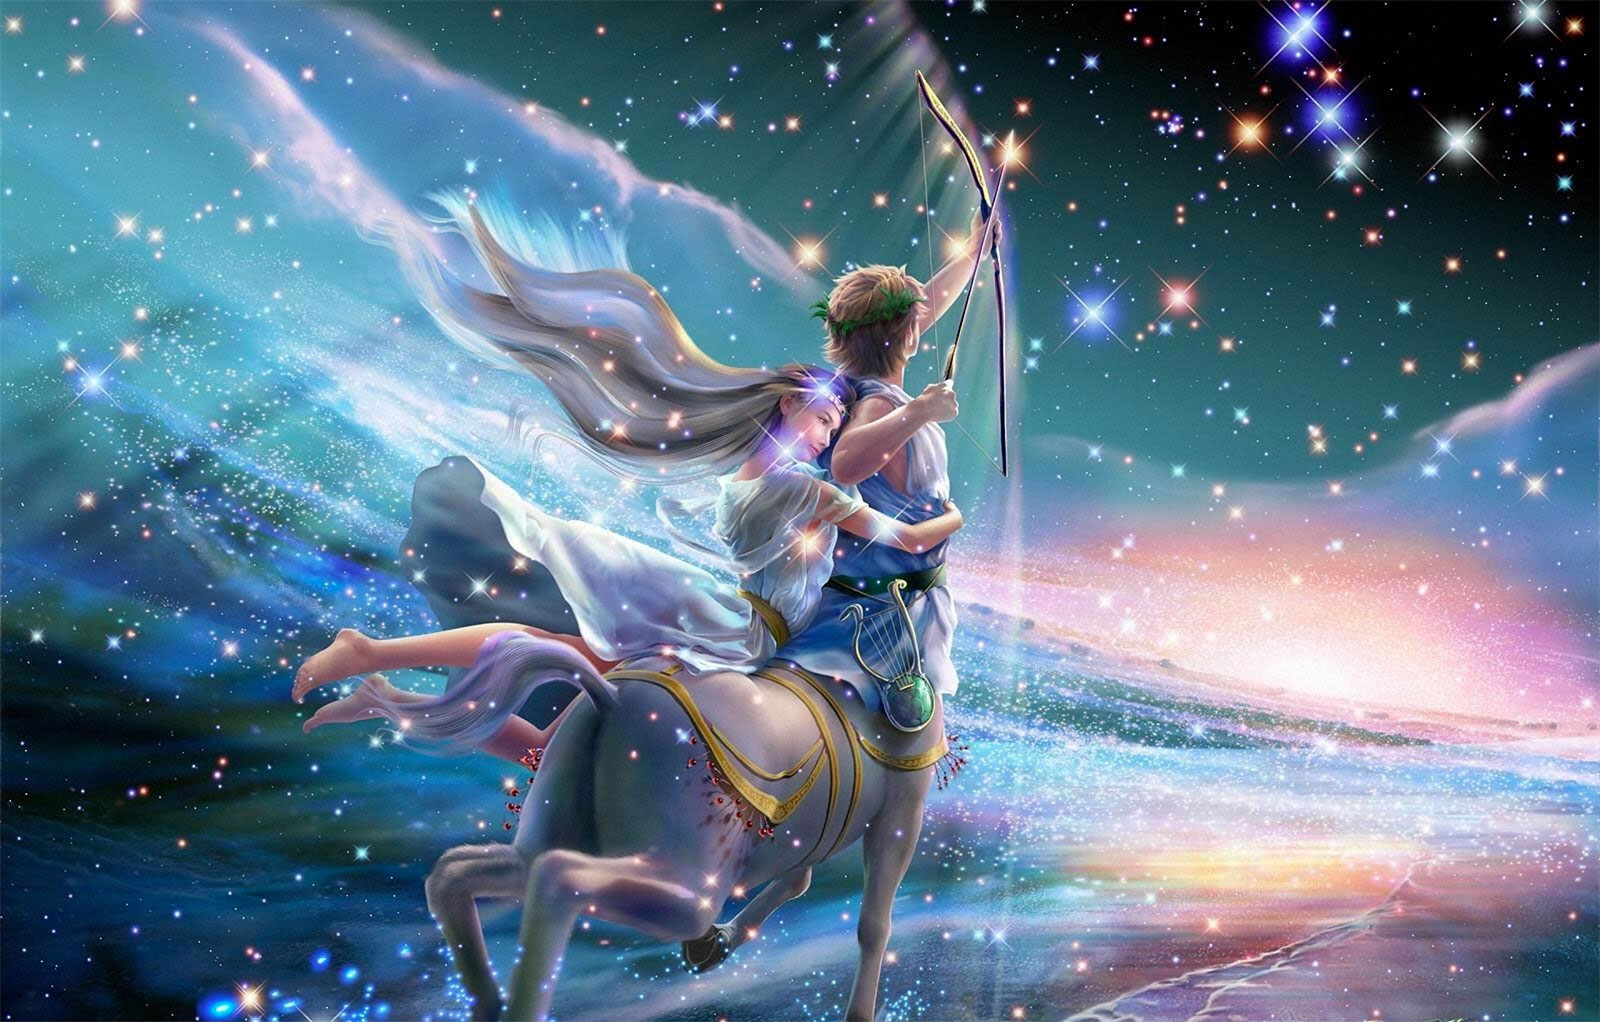 You are a Centaur in a parallel universe! Answer These Mystical Questions and We’ll Reveal Who You Are in a Parallel Universe